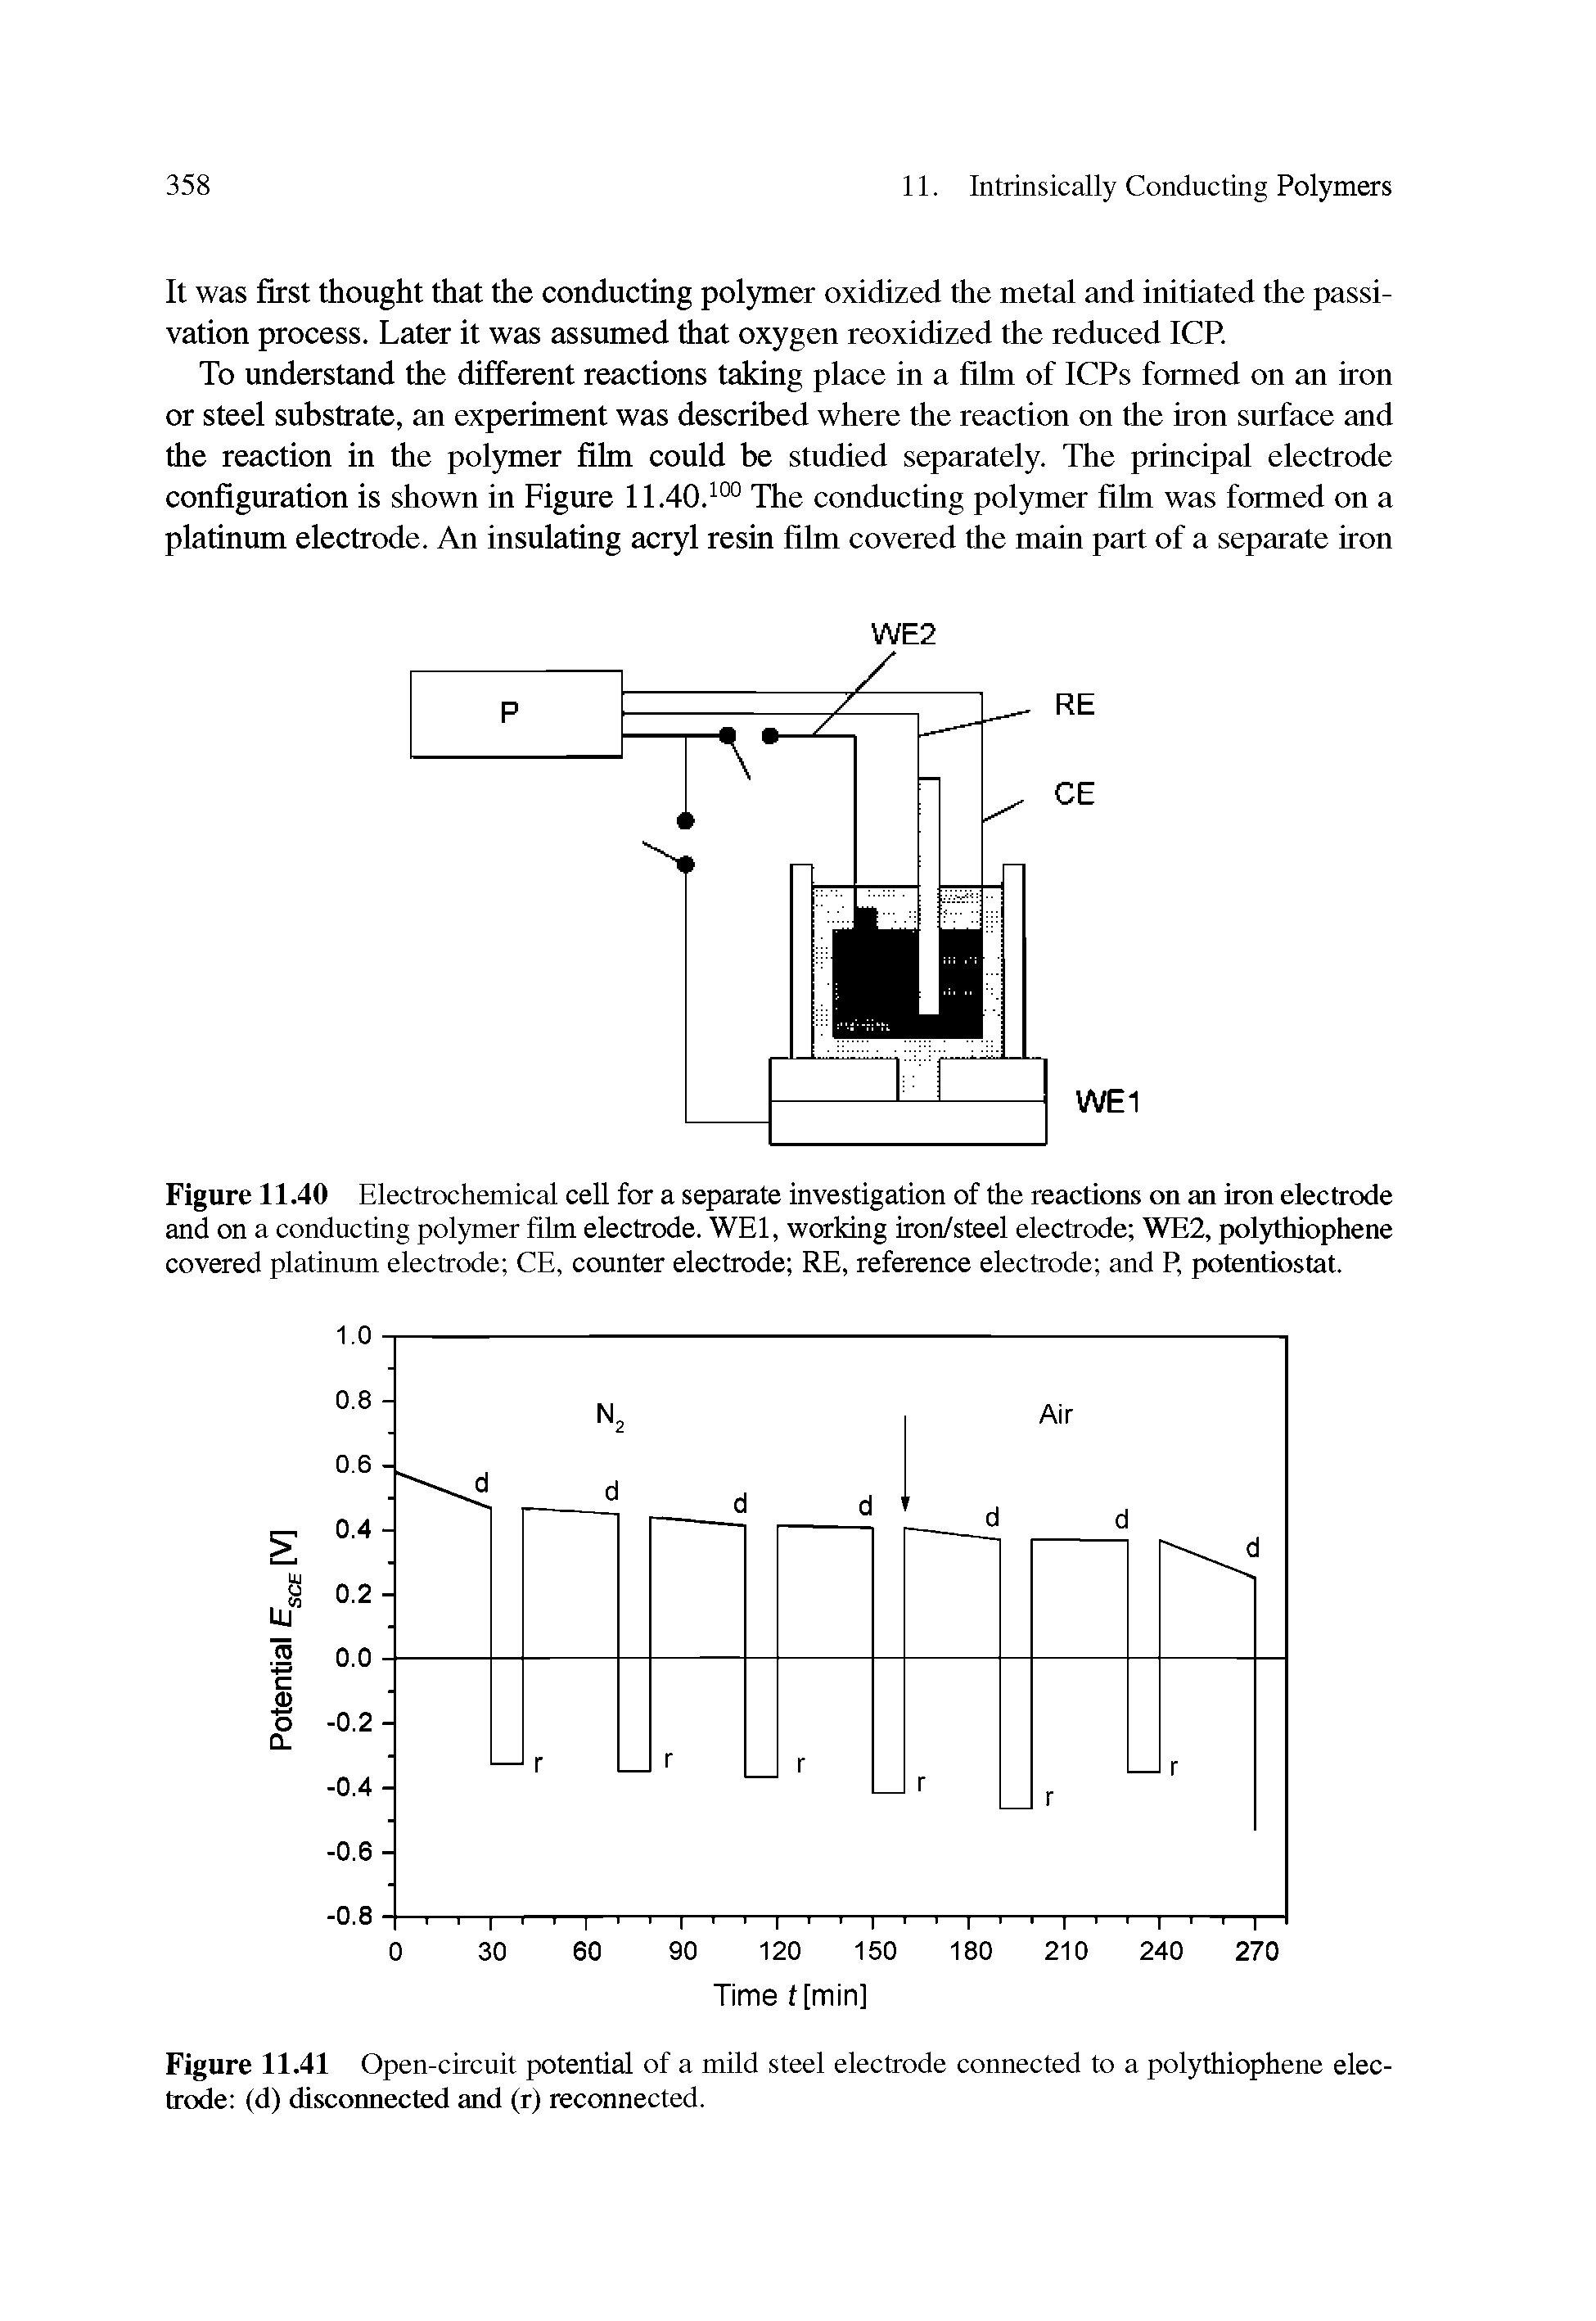 Figure 11.40 Electrochemical cell for a separate investigation of the reactions on an iron electrode and on a conducting polymer film electrode. WEI, working iron/steel electrode WE2, polythiophene covered platinum electrode CE, counter electrode RE, reference electrode and P, potentiostat.